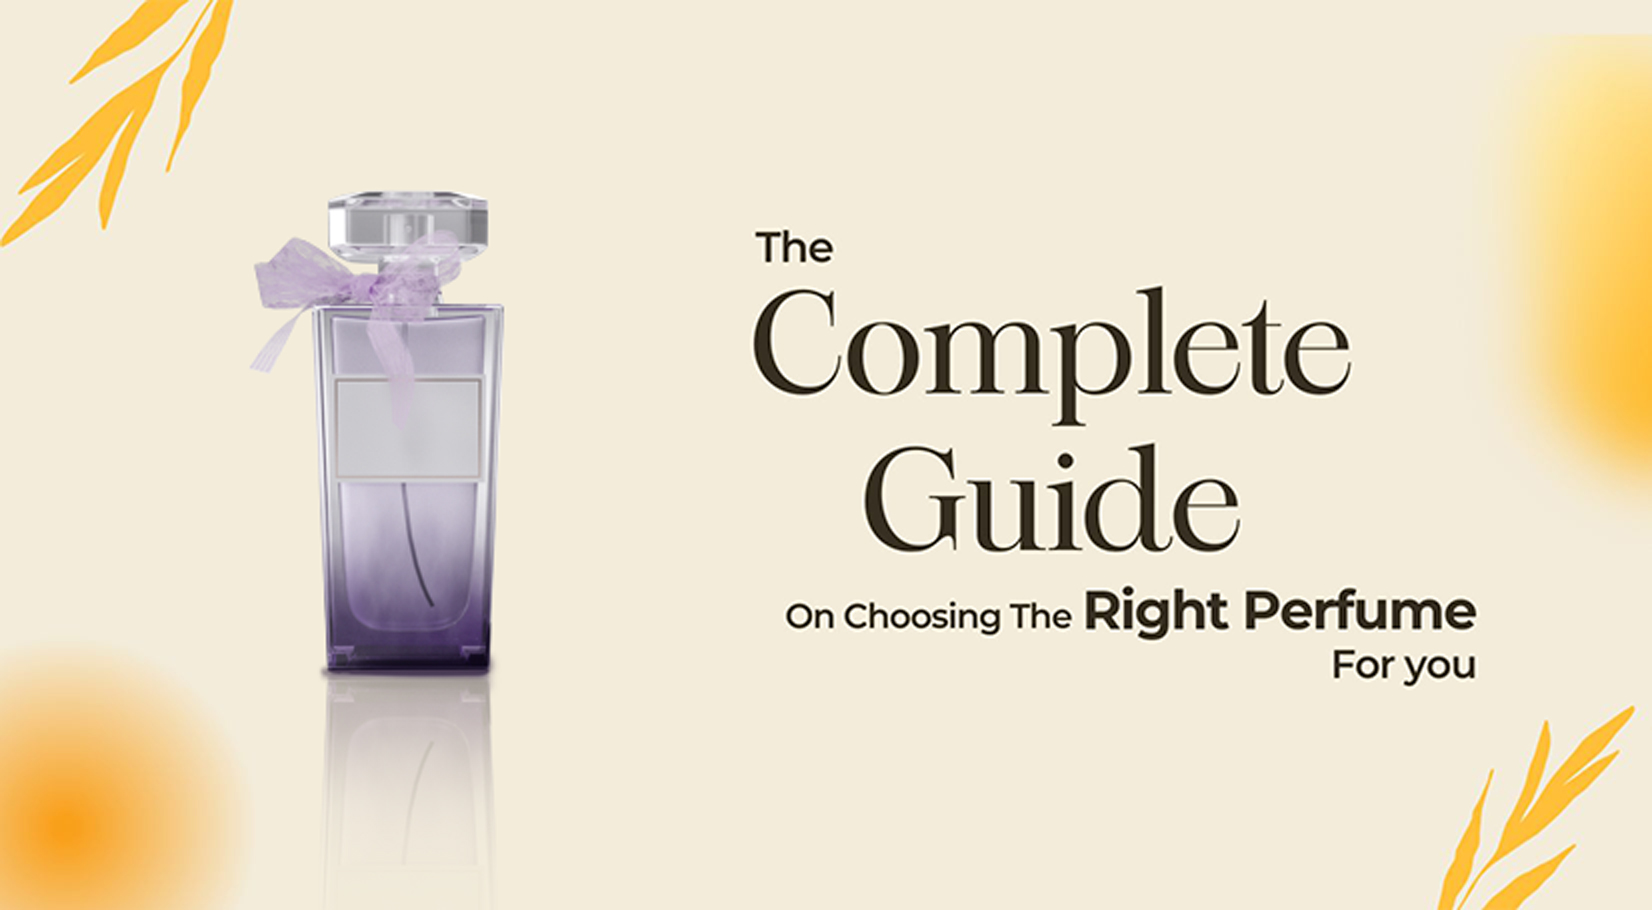 The Complete Guide On Choosing The Right Perfume For You